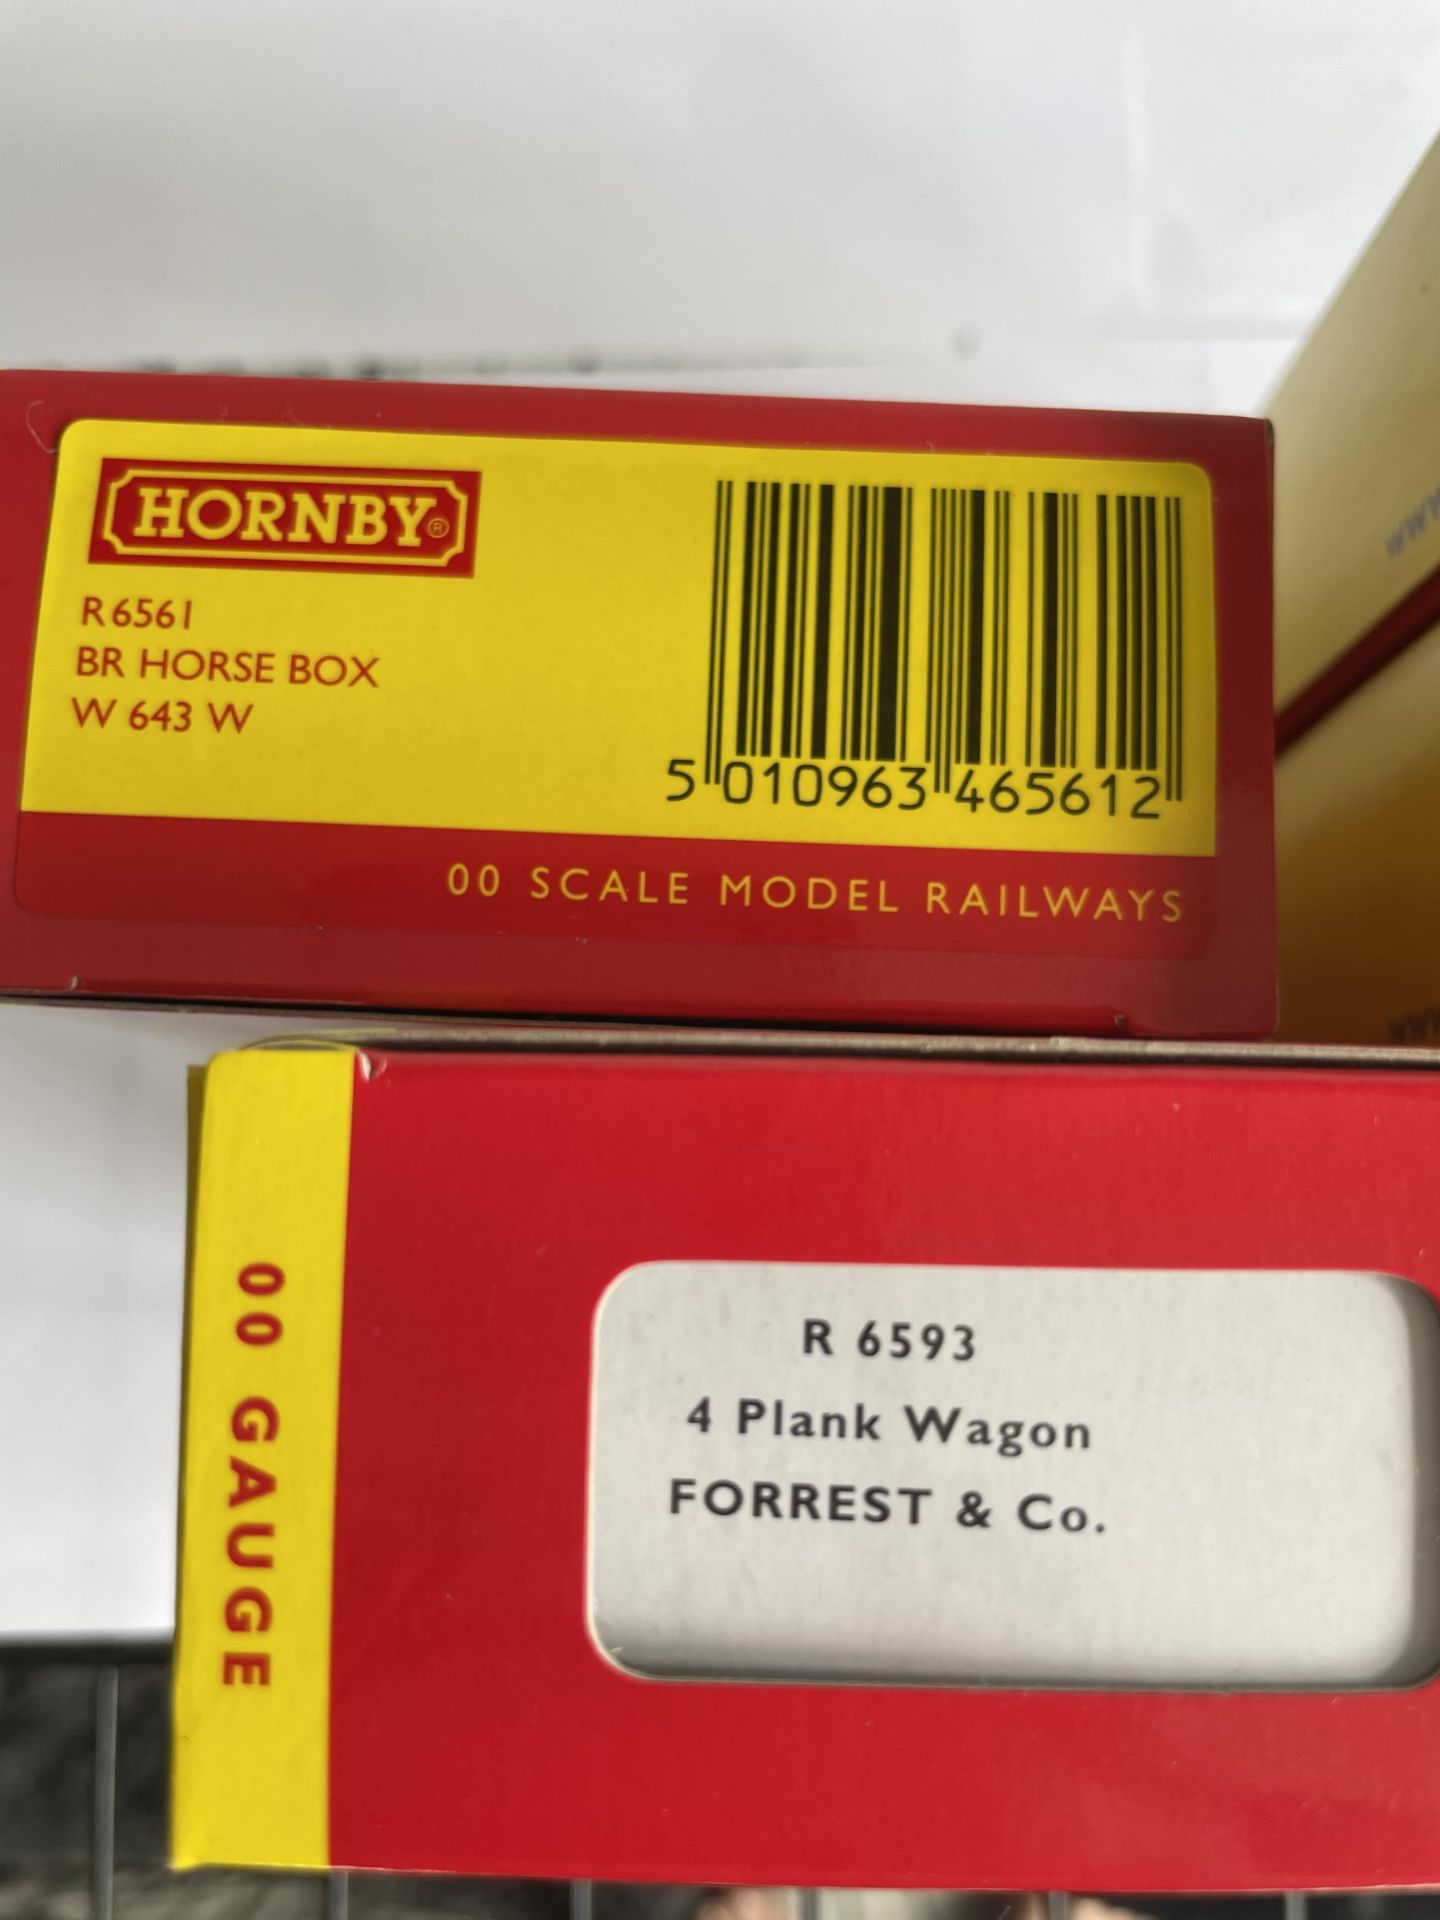 FIVE BOXED HORNBY 00 GAUGE FREIGHT CARRIAGES TO INCLUDE THREE SHELL TANKERS, A HORSE BOX AND A PLANK - Image 5 of 5